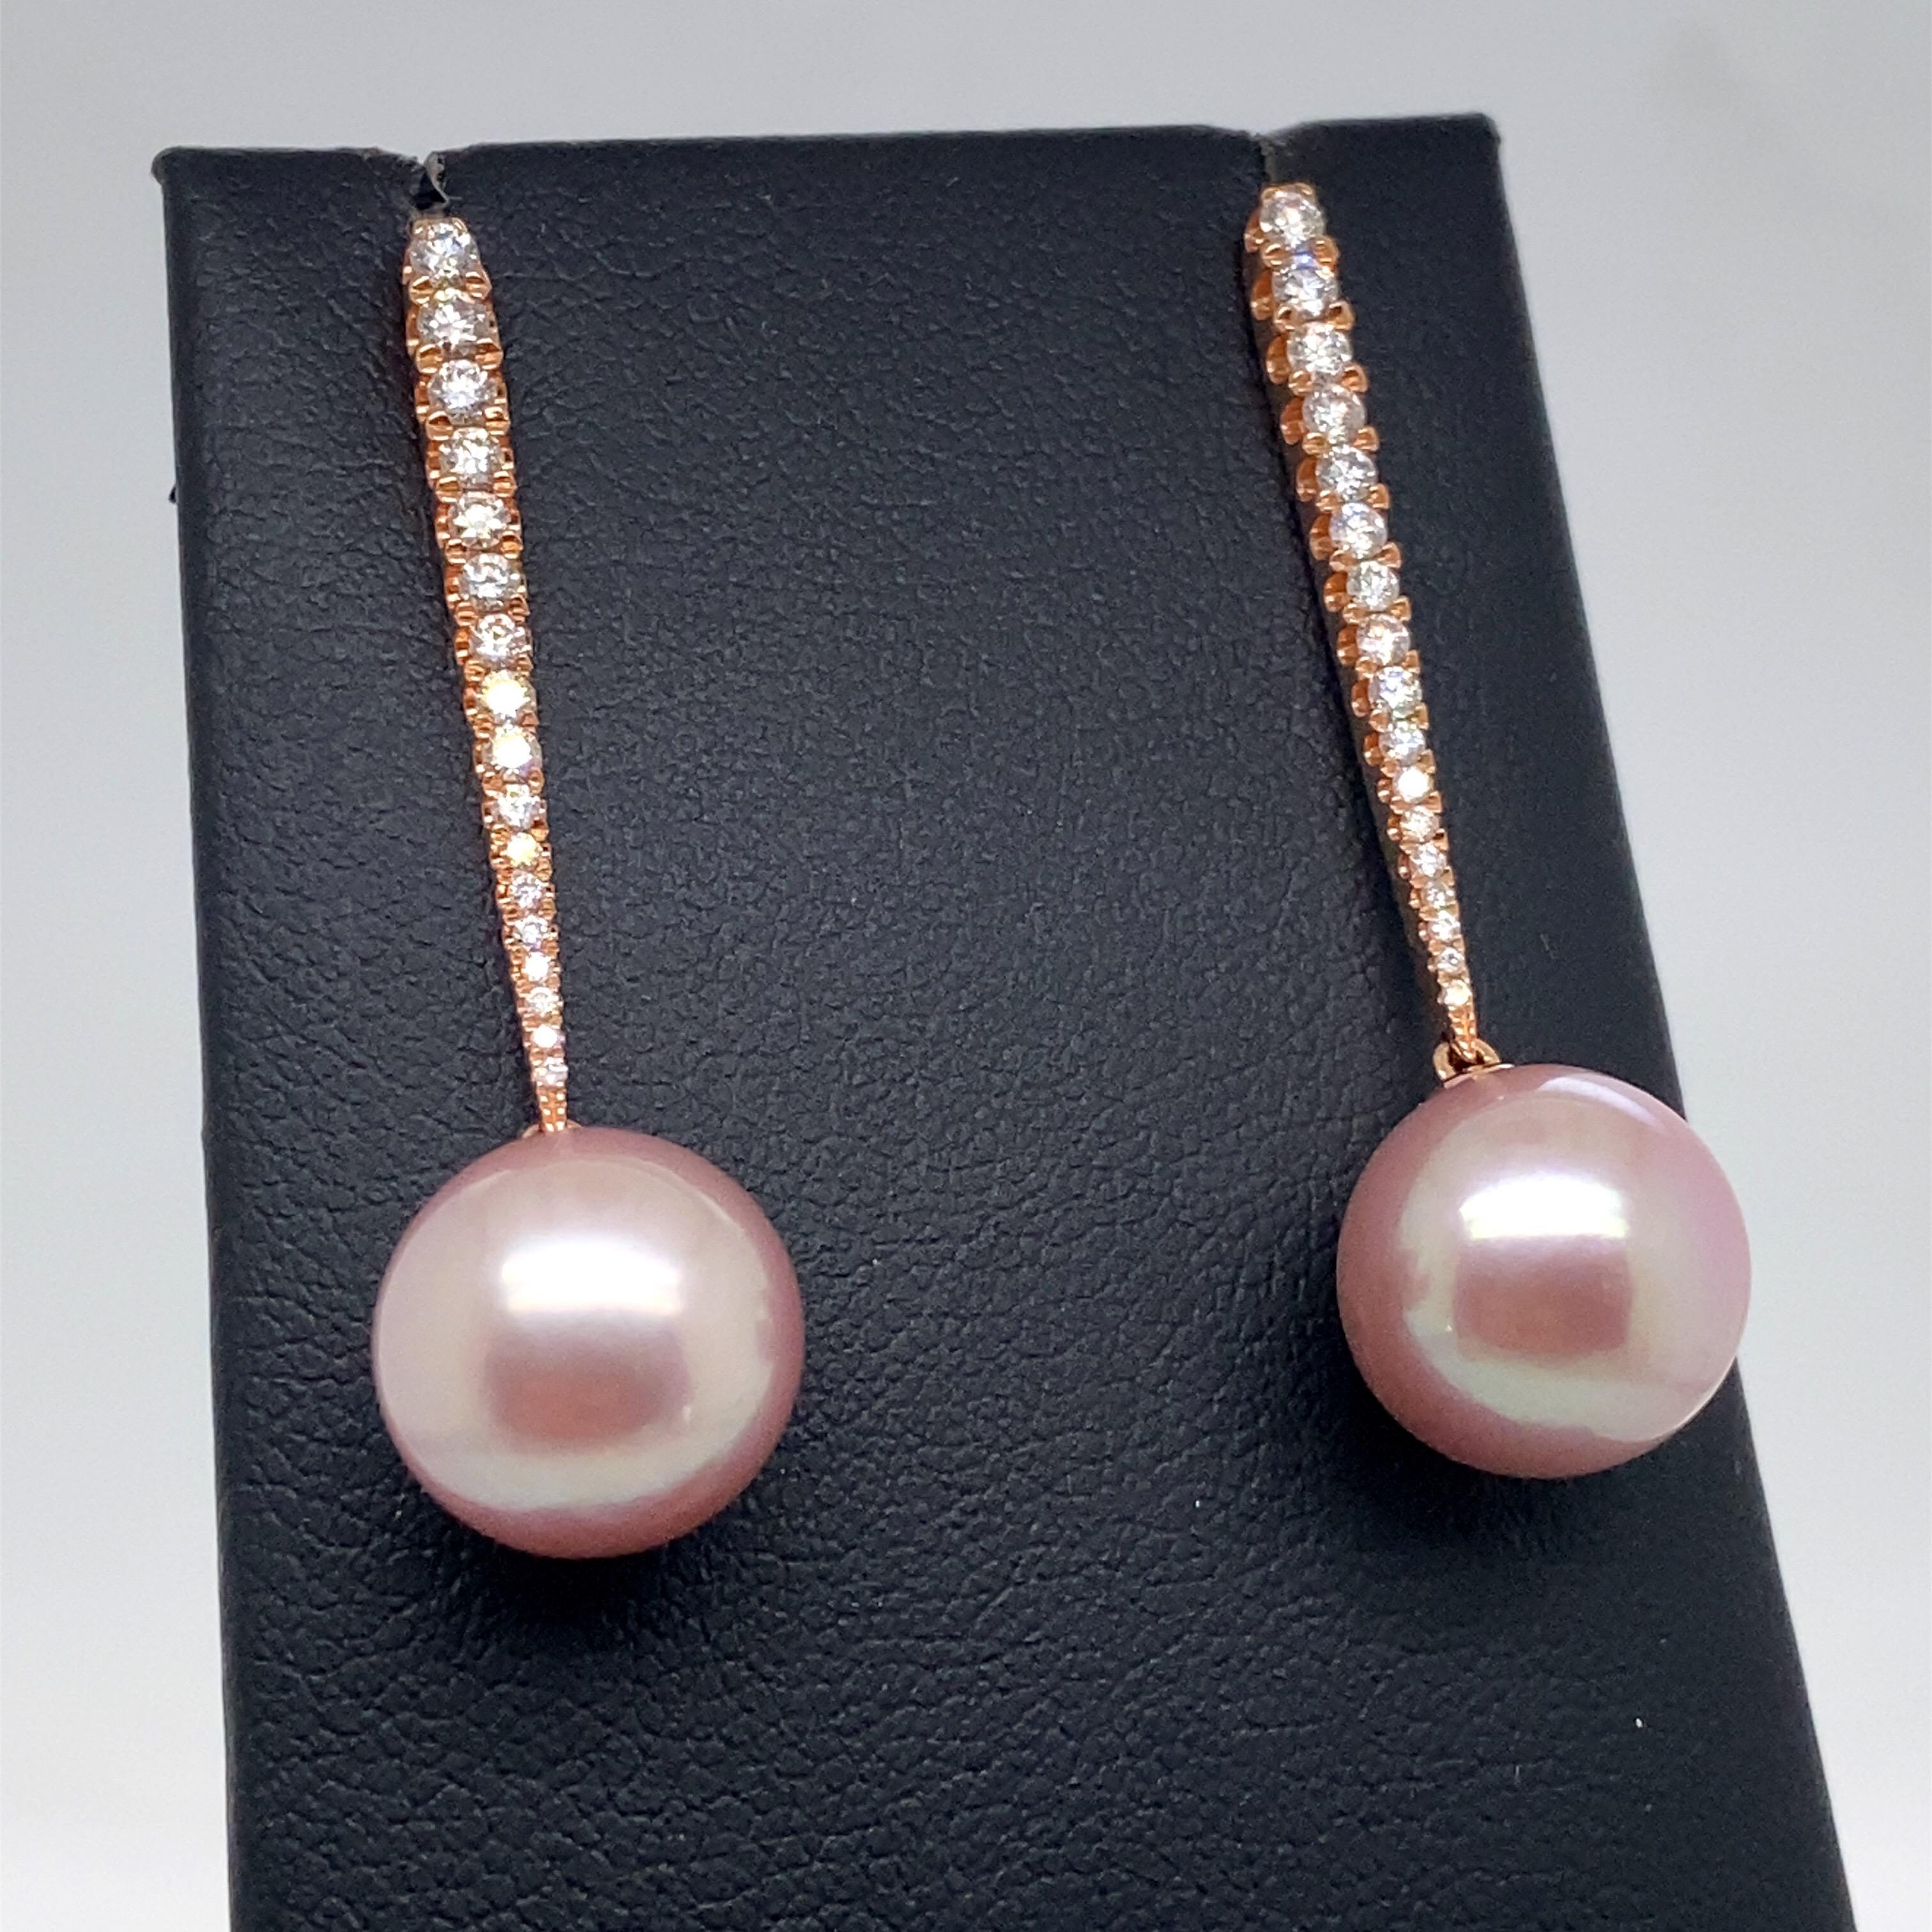 18K Rose gold drop earrings featuring two pink Freshwater pearls measuring 10-11 mm flanked with 34 round brilliants weighing 0.43 carats. 
Color G-H
Clarity SI